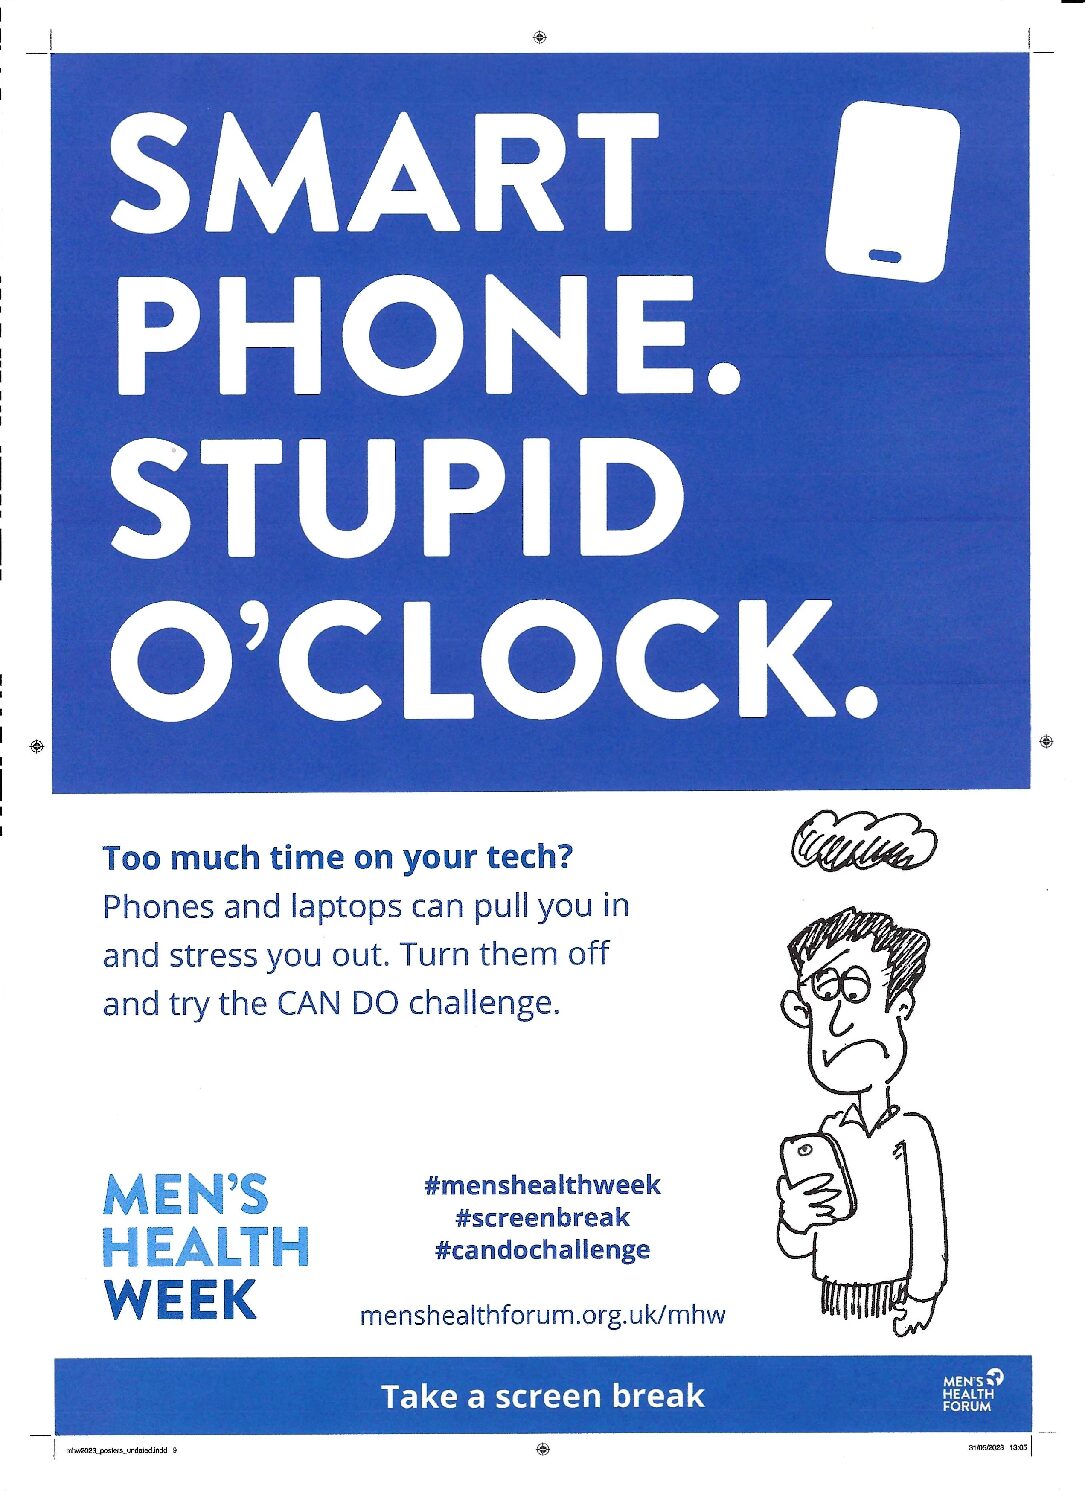 C A Services proudly supports Men’s Health Week during 12th-18th June